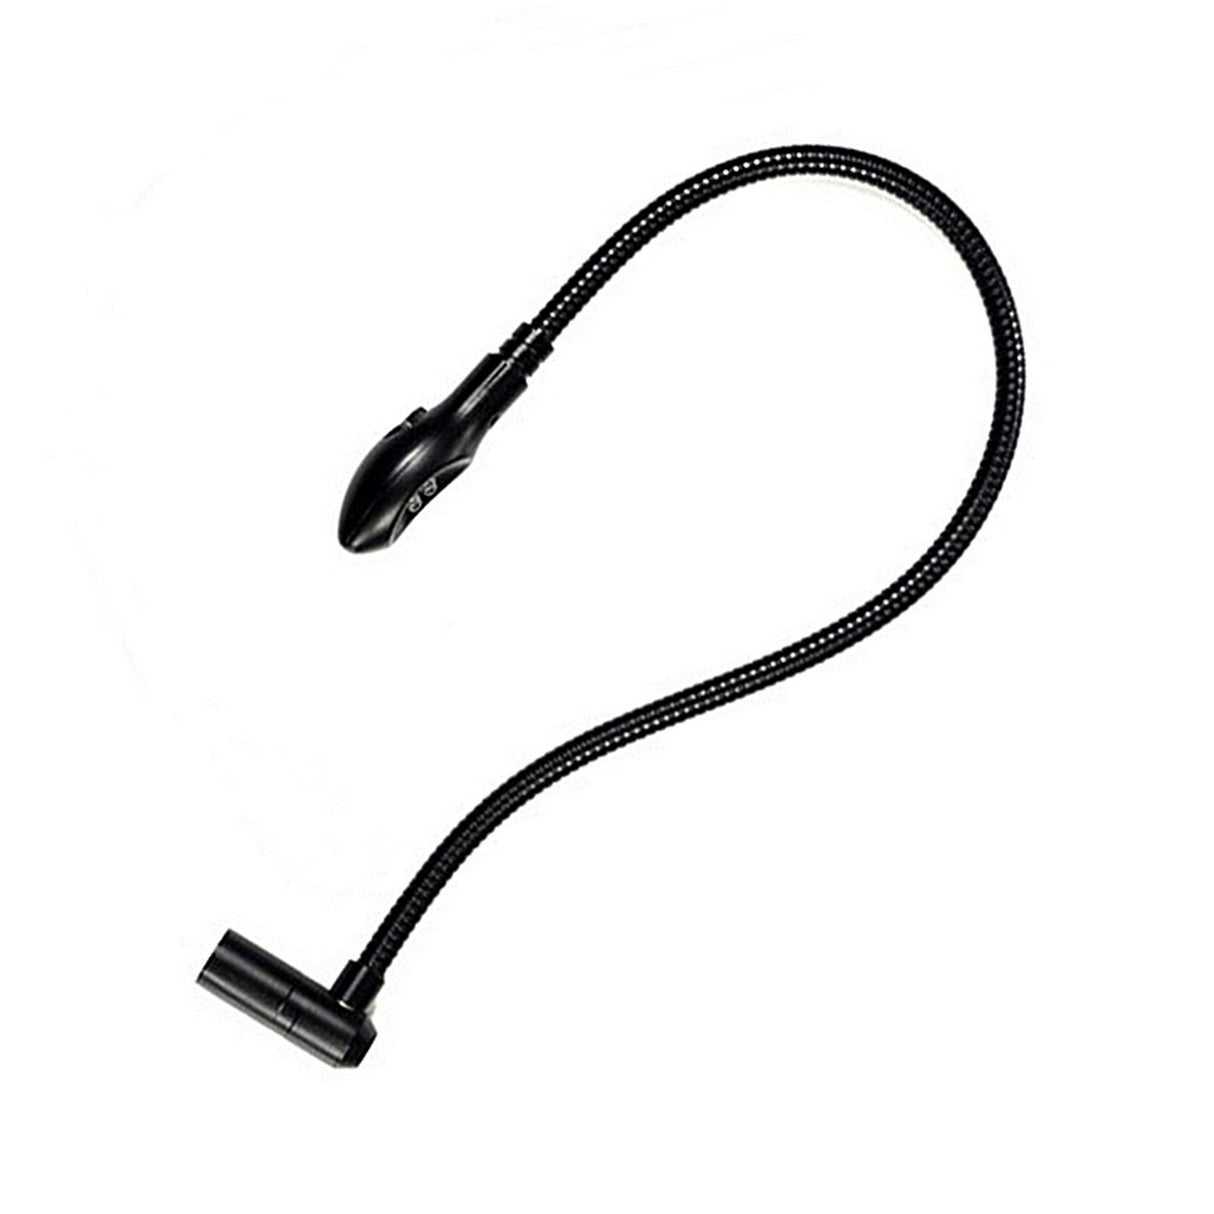 Allen & Heath AH-LED-LampX | 18 Inch Gooseneck Lamp for Mixing Console 4pin XLR Connection